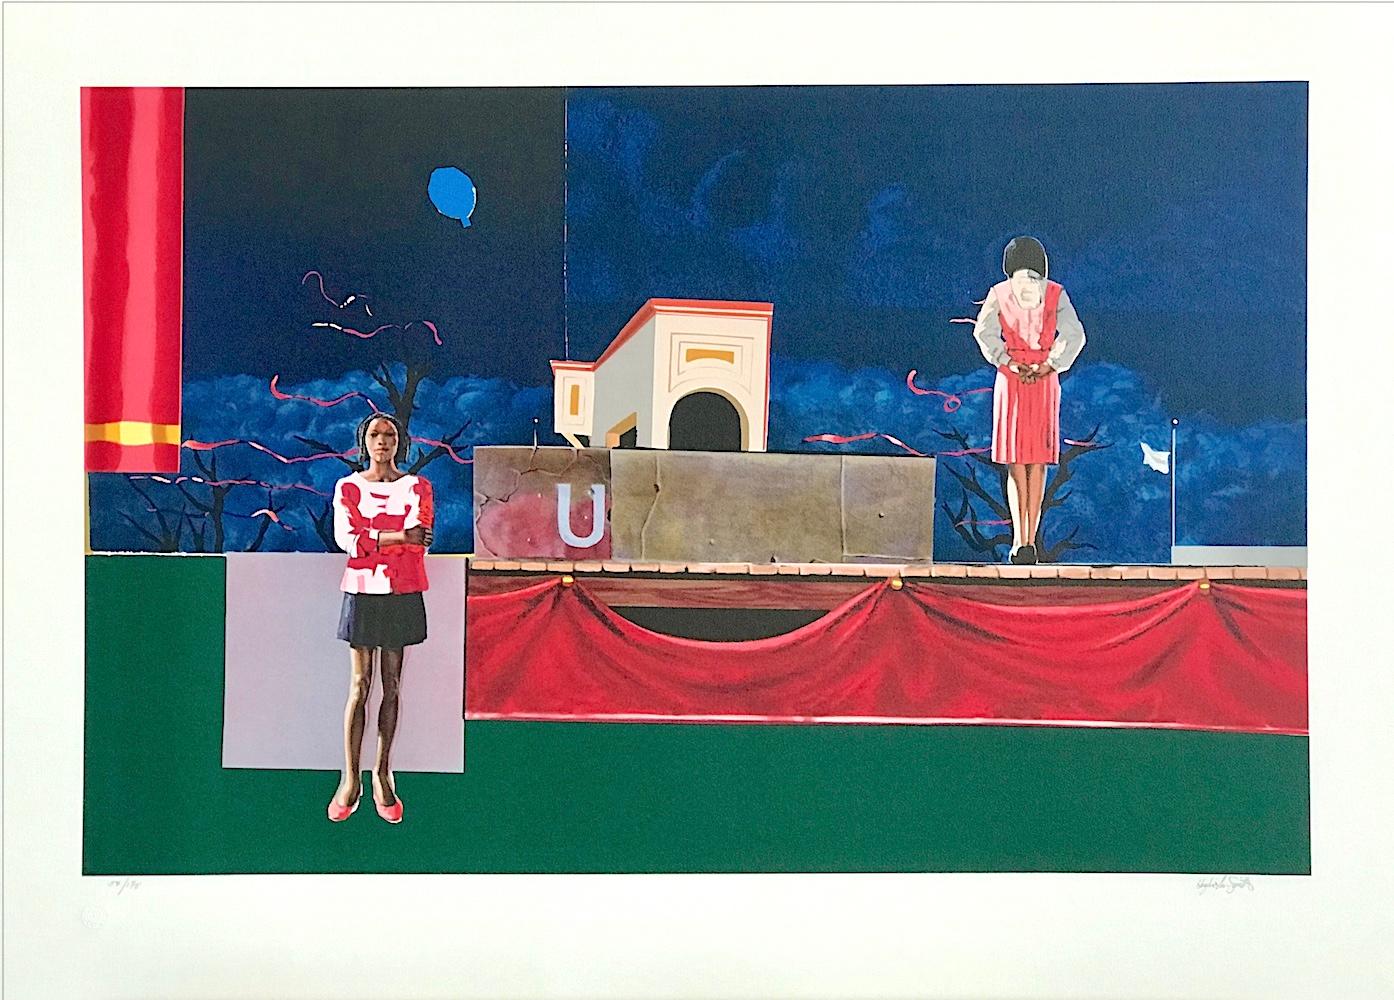 NOCTURNE Signed Lithograph, Black Women Theater Stage Night Sky Balloon Ribbons - Contemporary Print by Hughie Lee-Smith